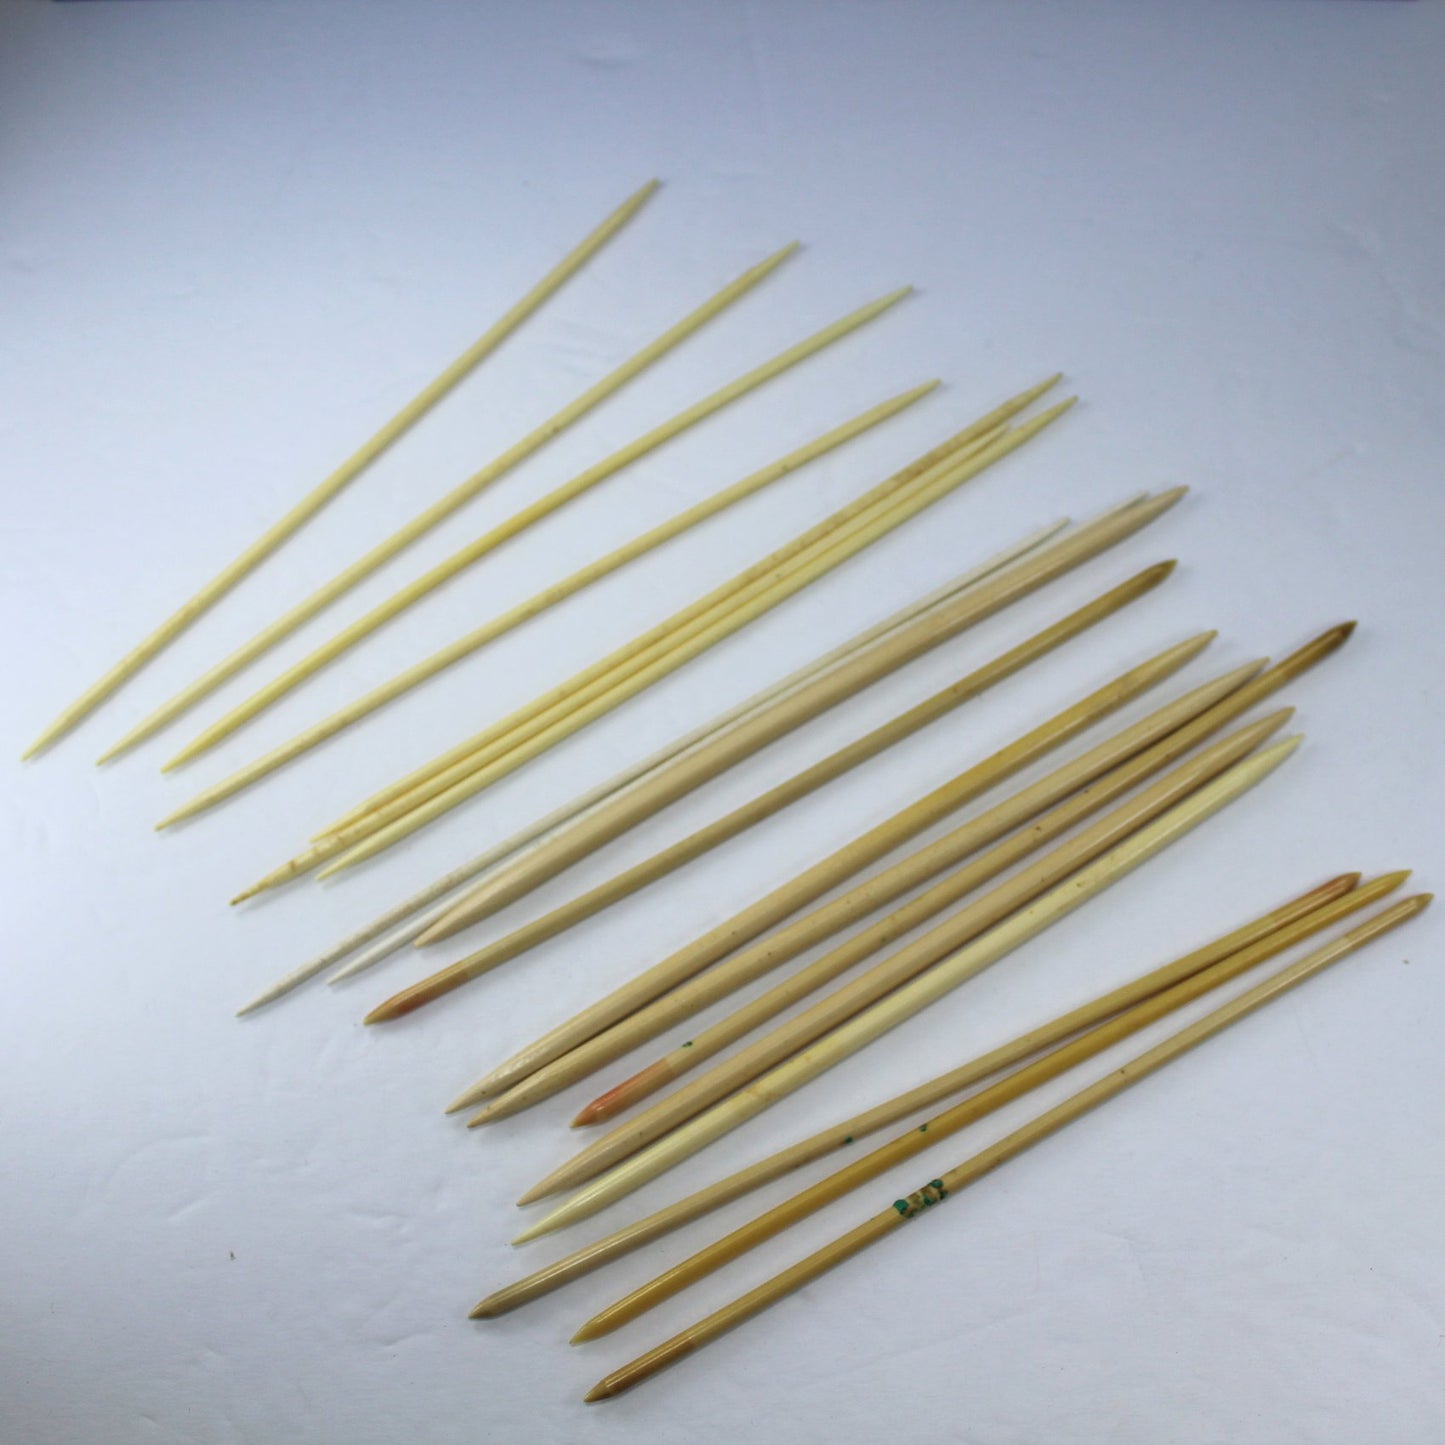 Collection 19 Vintage Double End Point Knitting Needles Some Chester 7" all needles